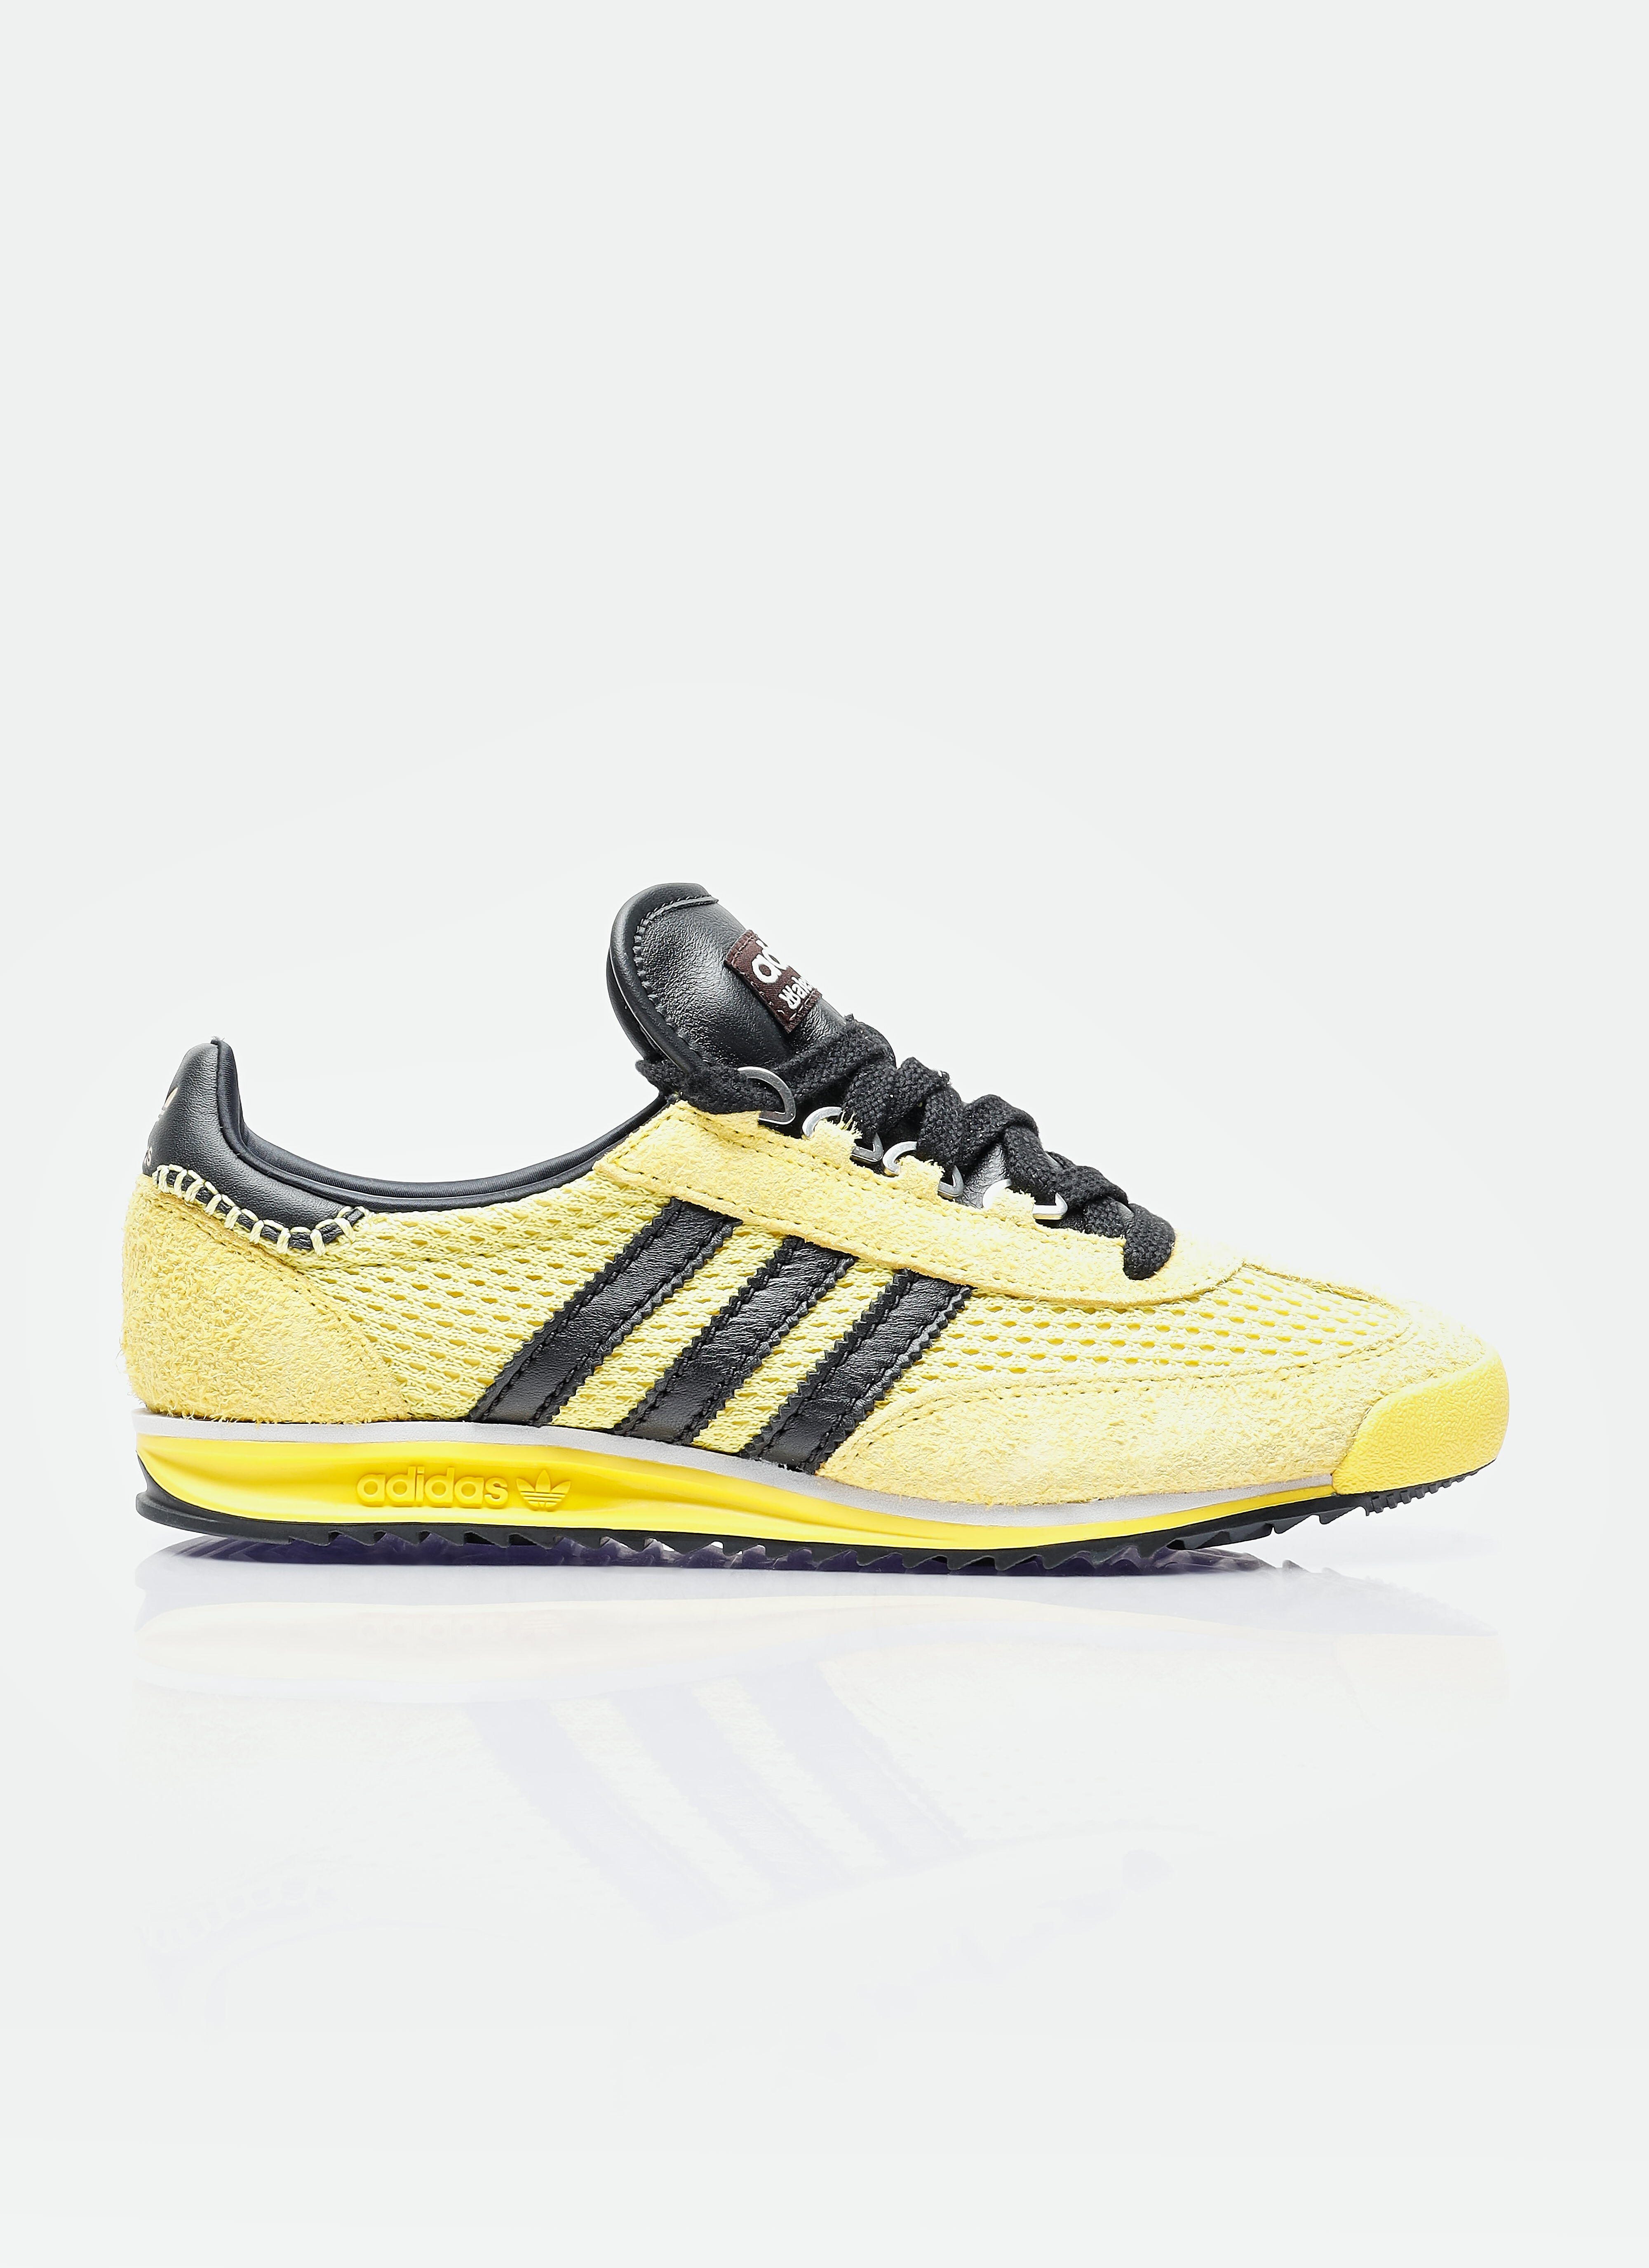 adidas by Wales Bonner SL76 Sneakers Yellow awb0357010